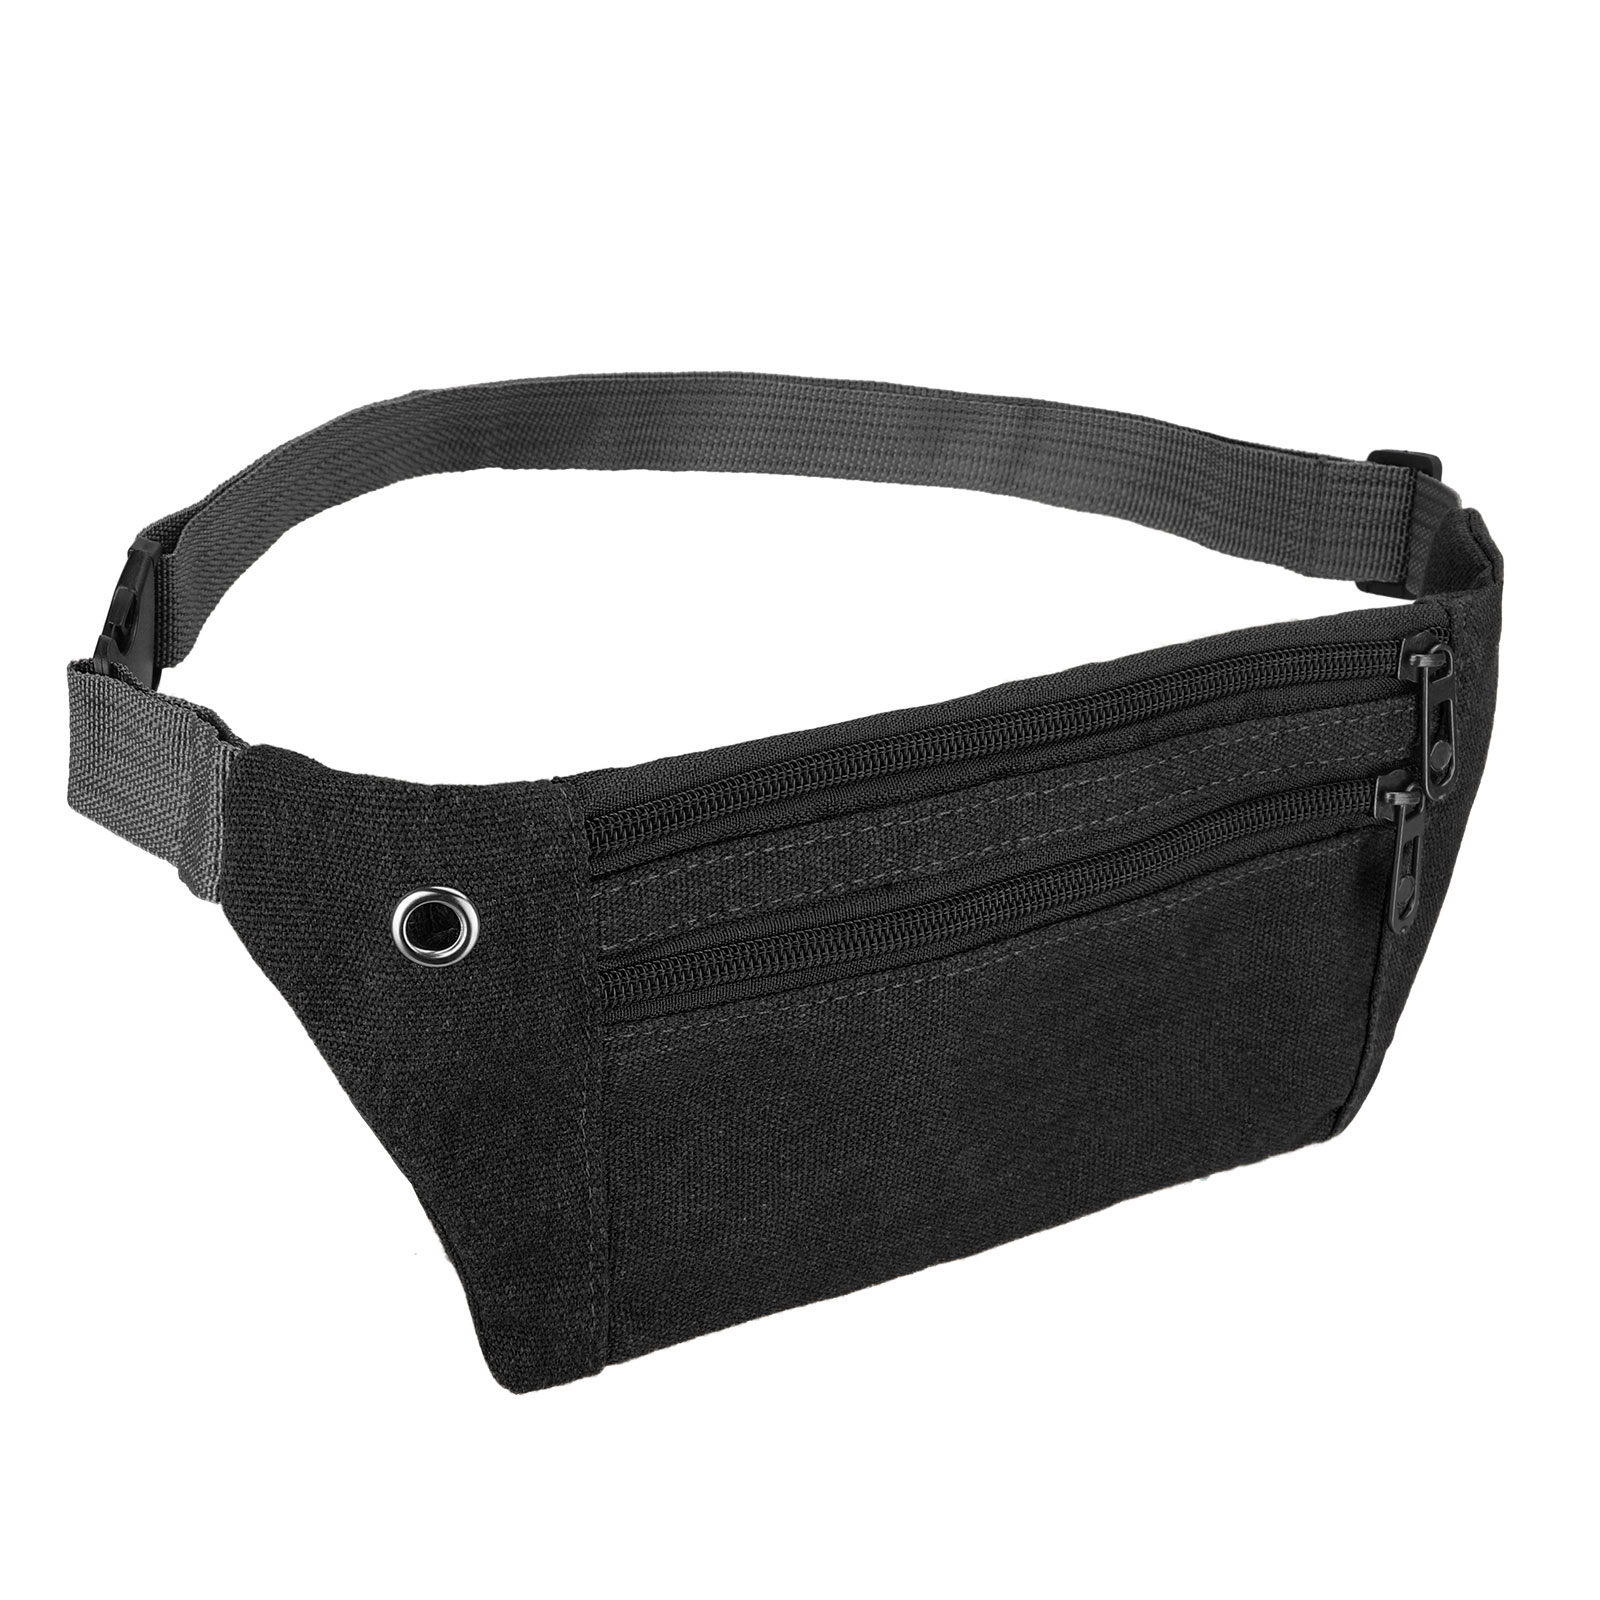 AOTSON Running Belt Waist Pack Outdoor Fitness Fanny Pack Sports Belt Pocket with 2 Expandable Pockets and No Bounce Zipper Sweatproof Rainproof for Men Women and Mobile Phone 